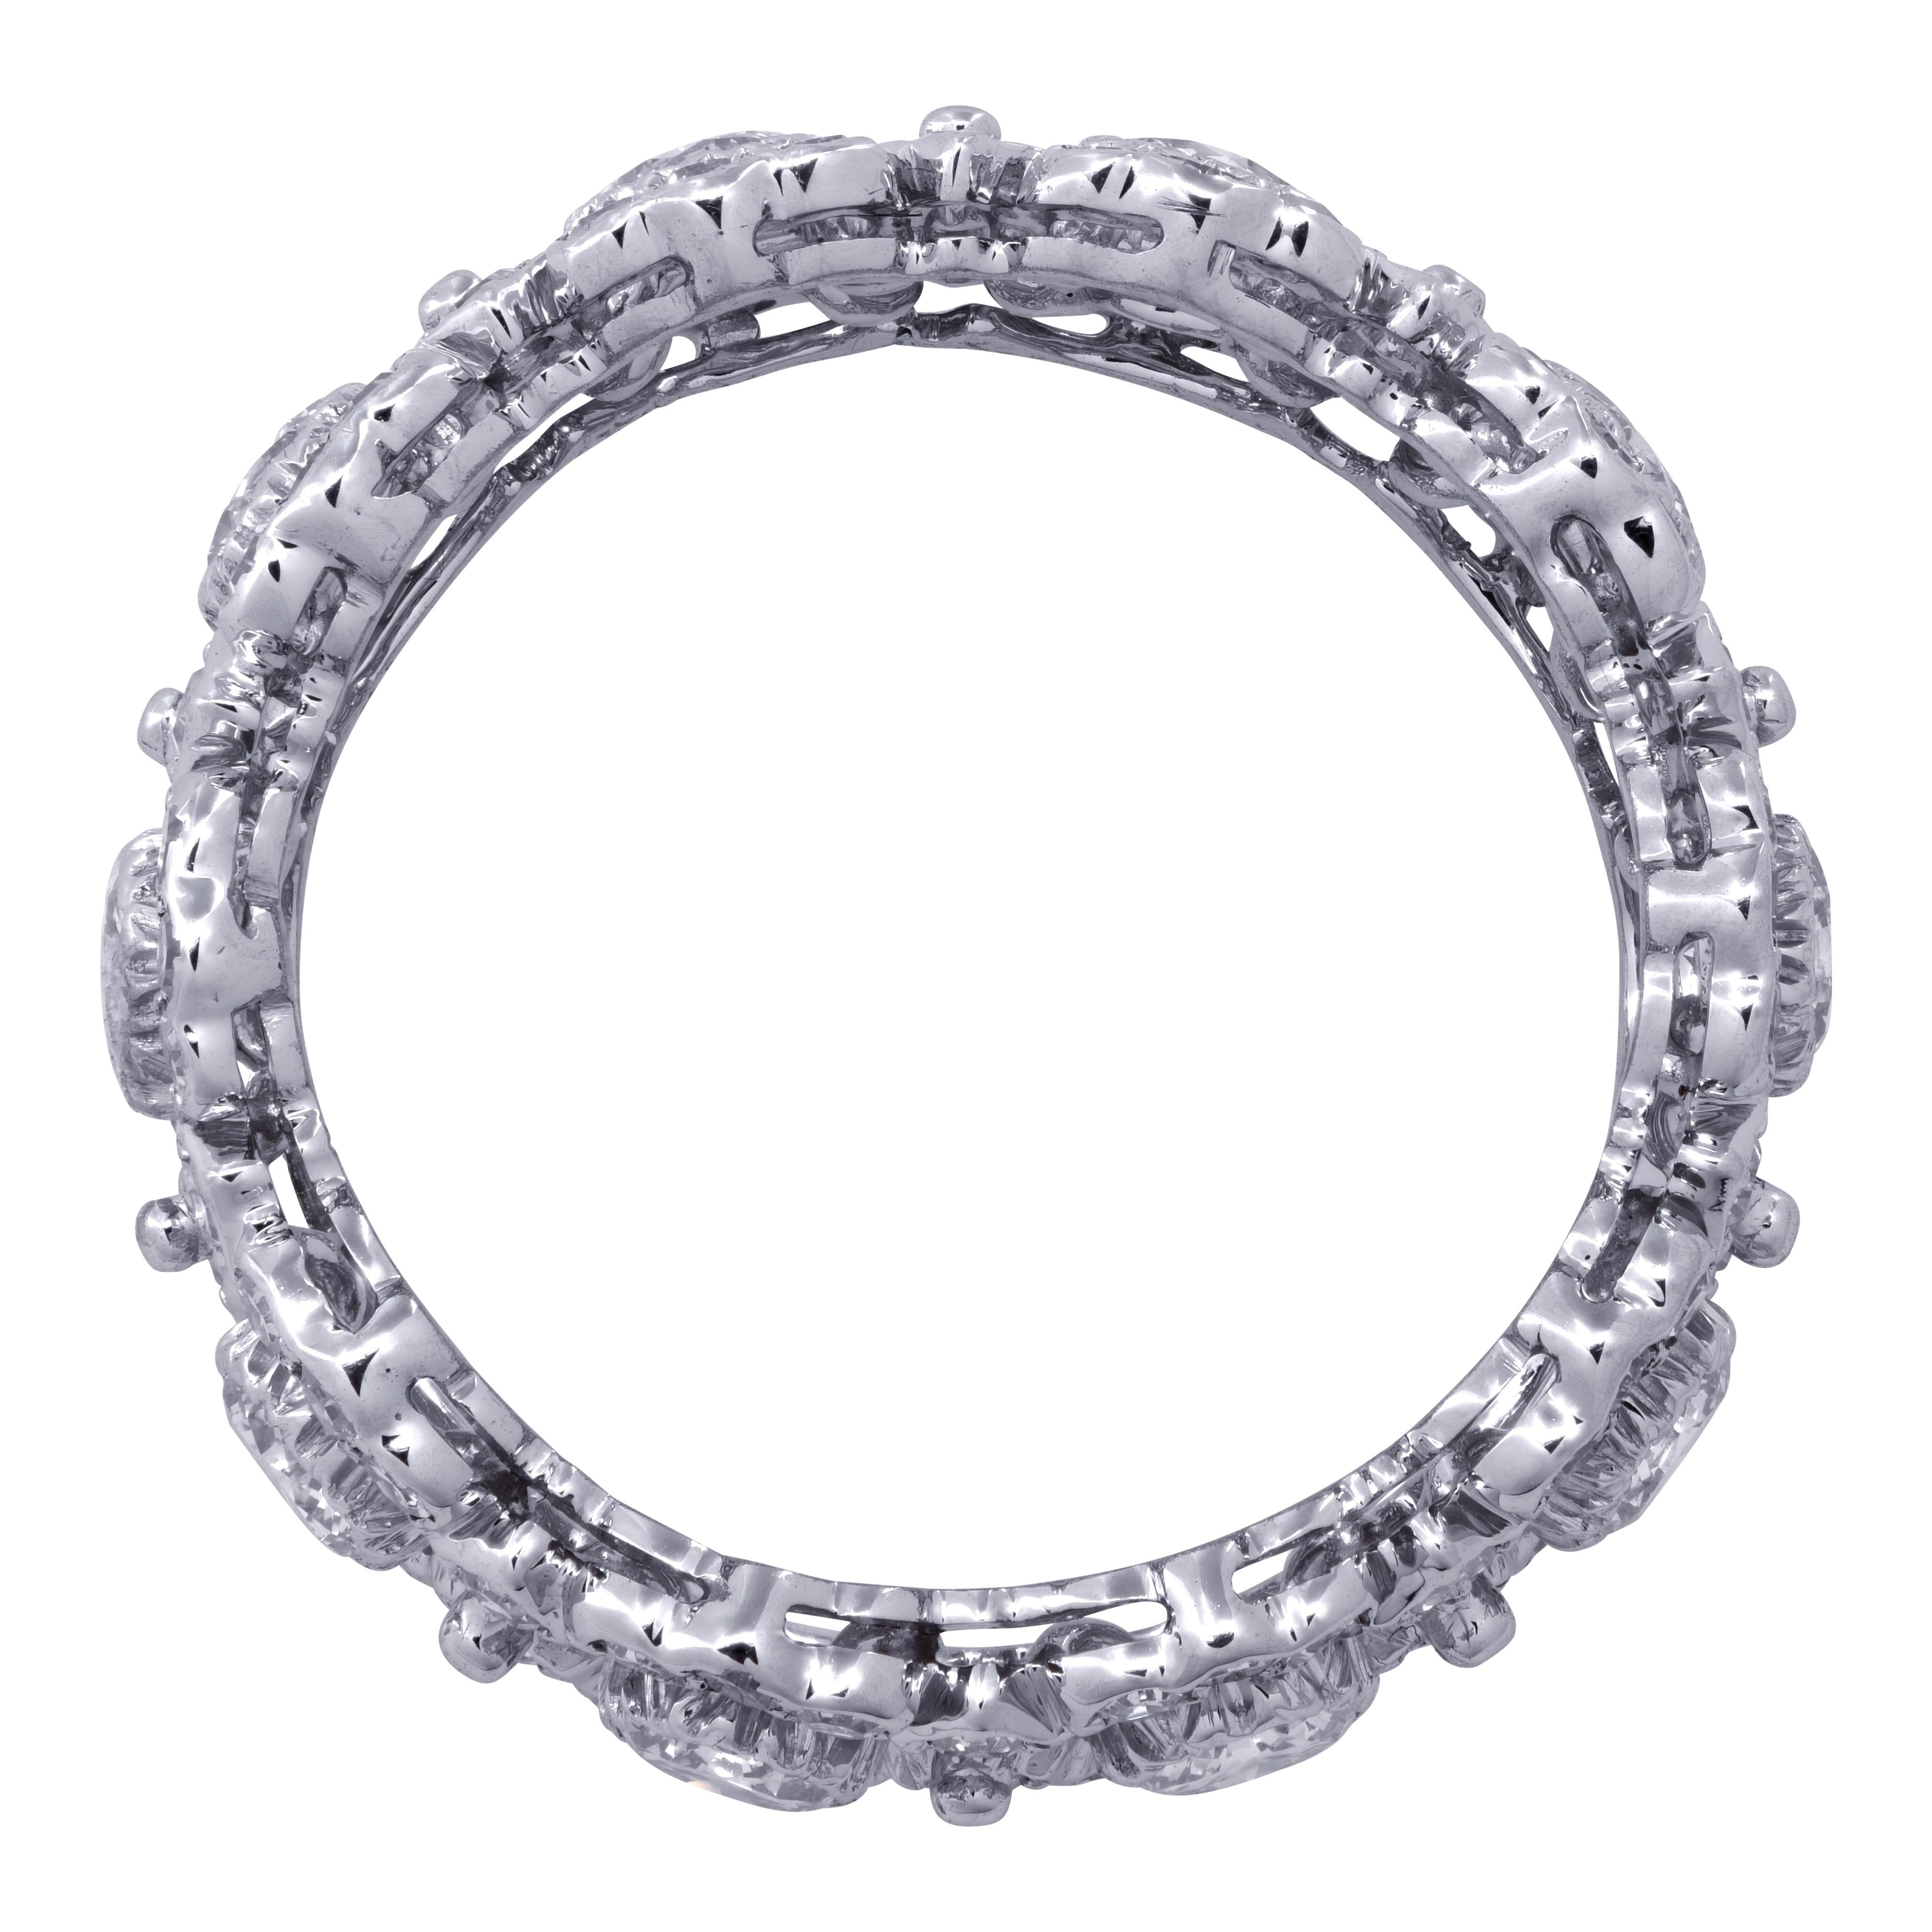 Buccellati Ghirlanda Eternelle Ring crafted in 18 karat white gold featuring 110 round brilliant & single cut diamonds weighing approximately 2.6 carats total, G color, VS clarity, arranged in a fine lacey openwork display. This beautiful band